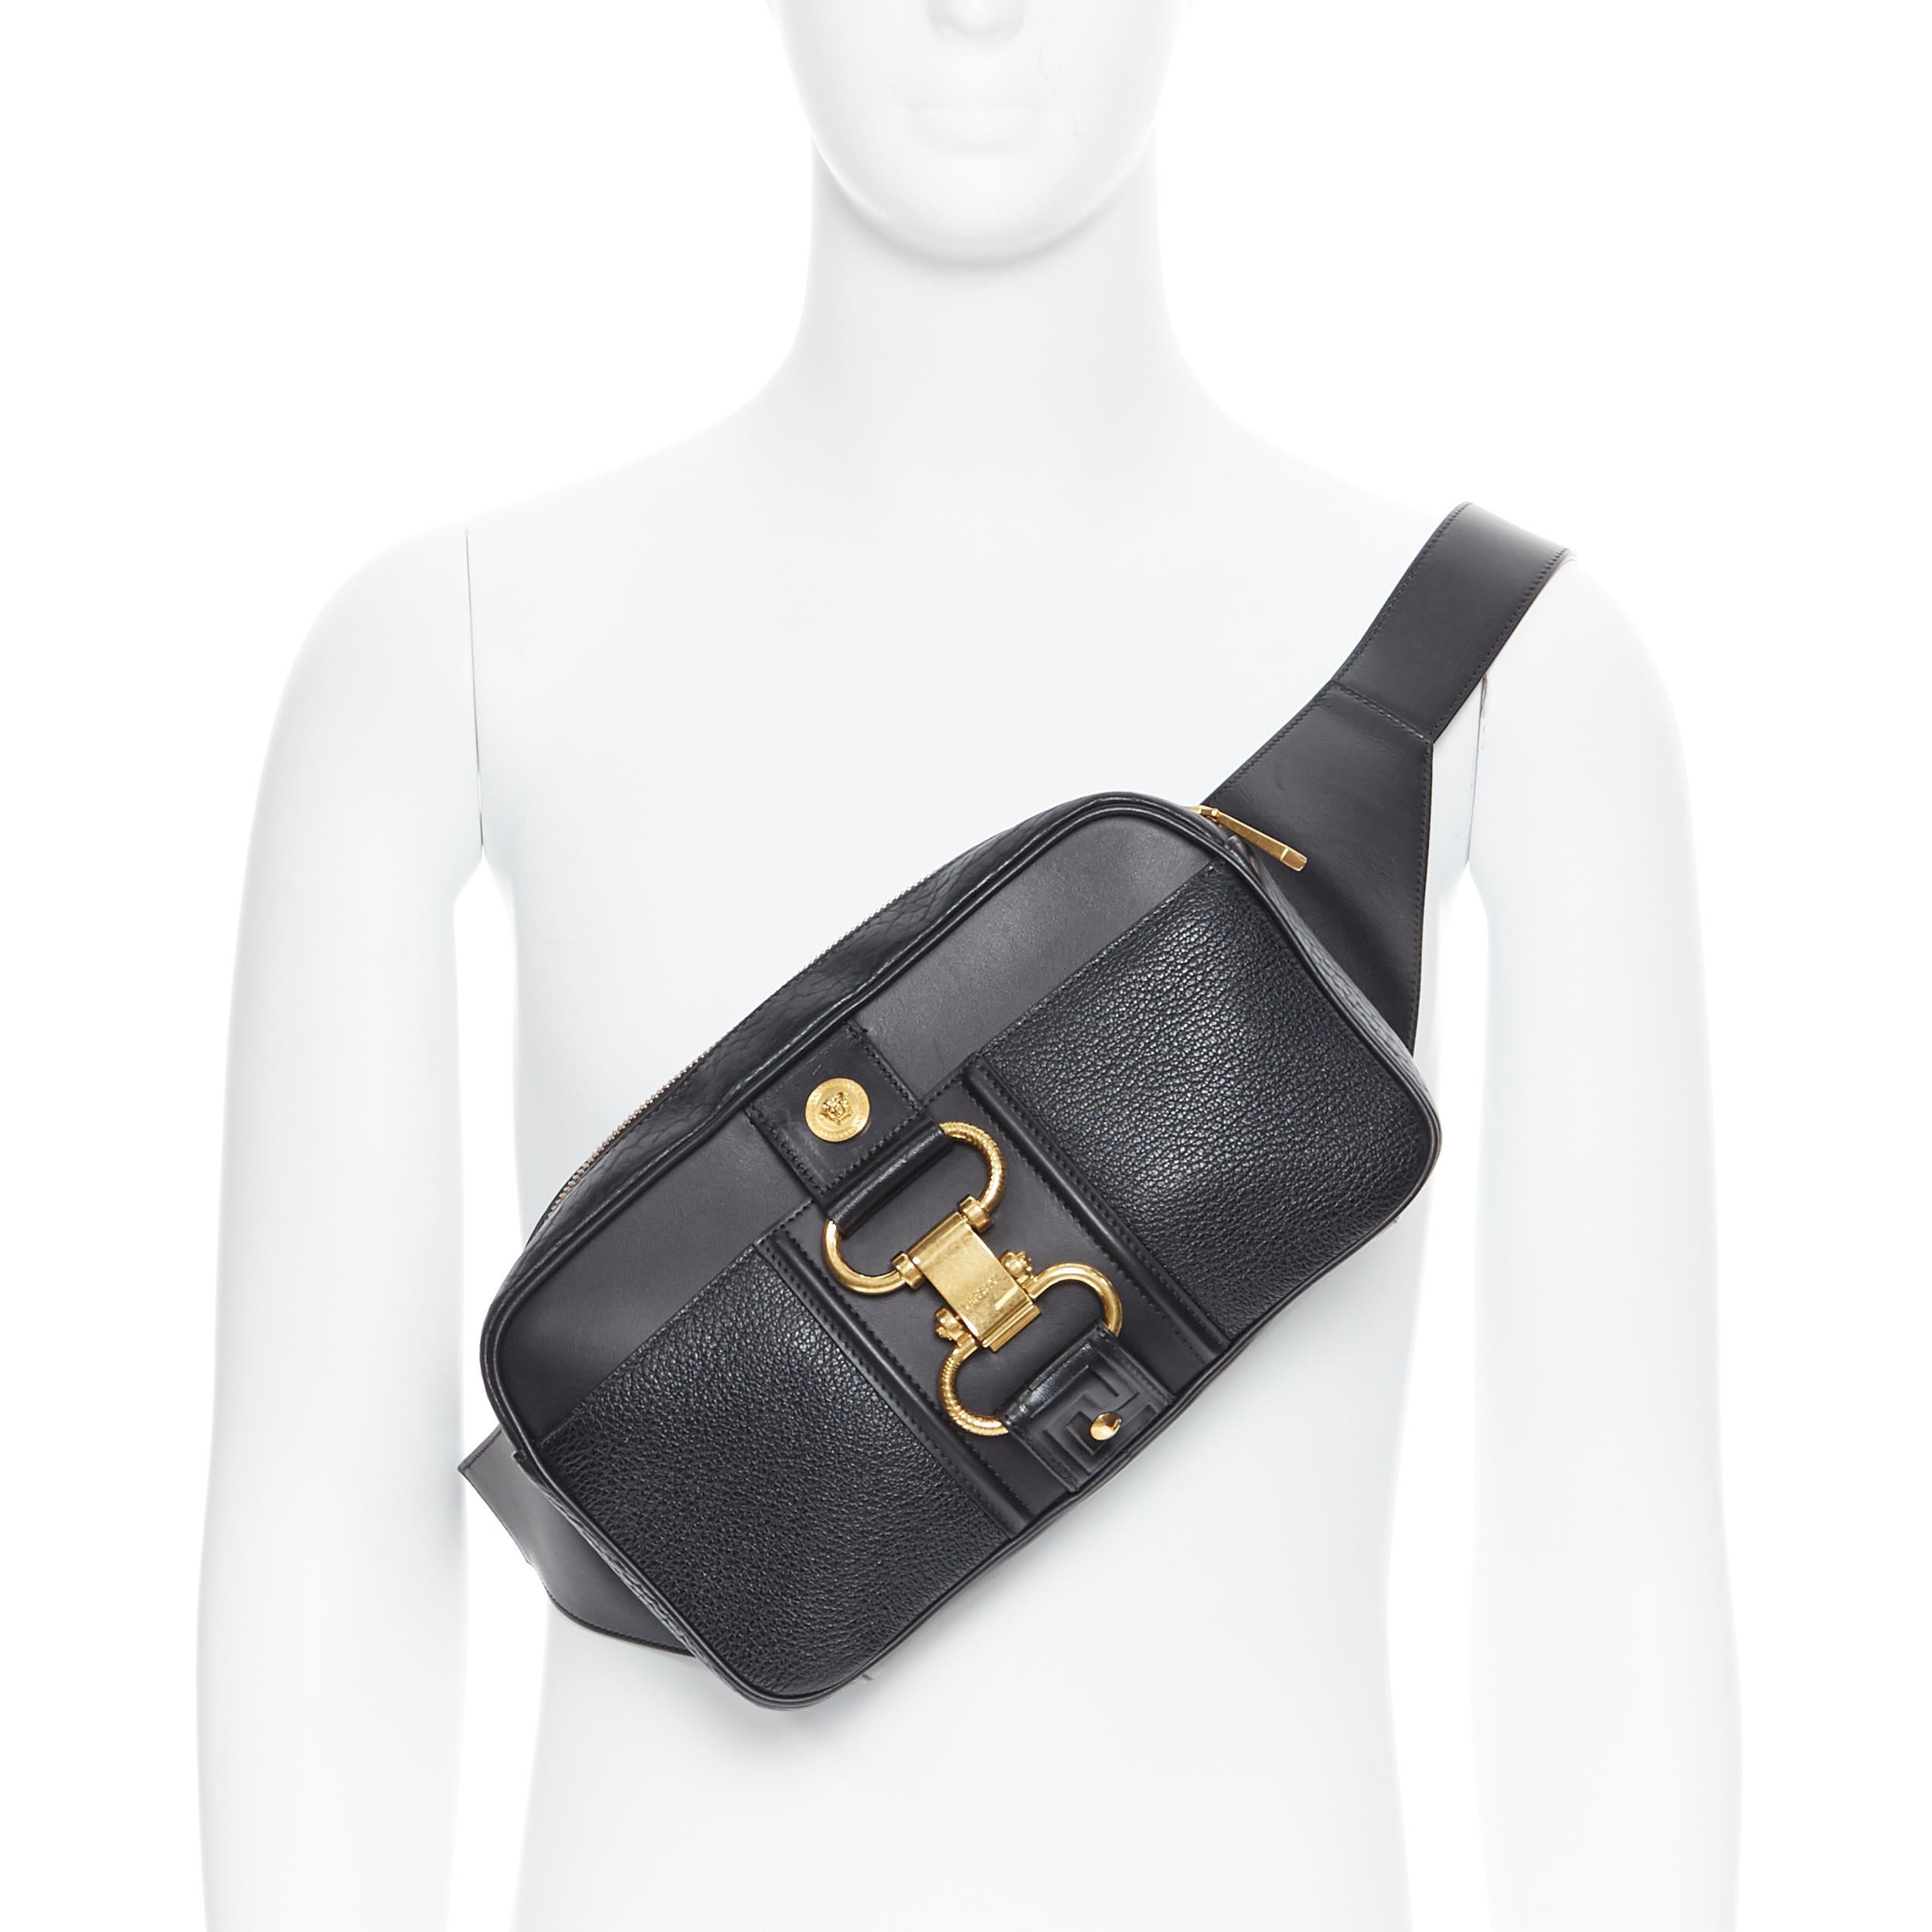 new VERSACE 2019 Runway black leather clasp buckle Medusa crossbody belt bag
Brand: Versace
Designer: Donatella Versace
Collection: Fall Winter 2019
Model Name / Style: Leather waist bag
Material: Leather
Color: Black
Pattern: Solid
Closure: